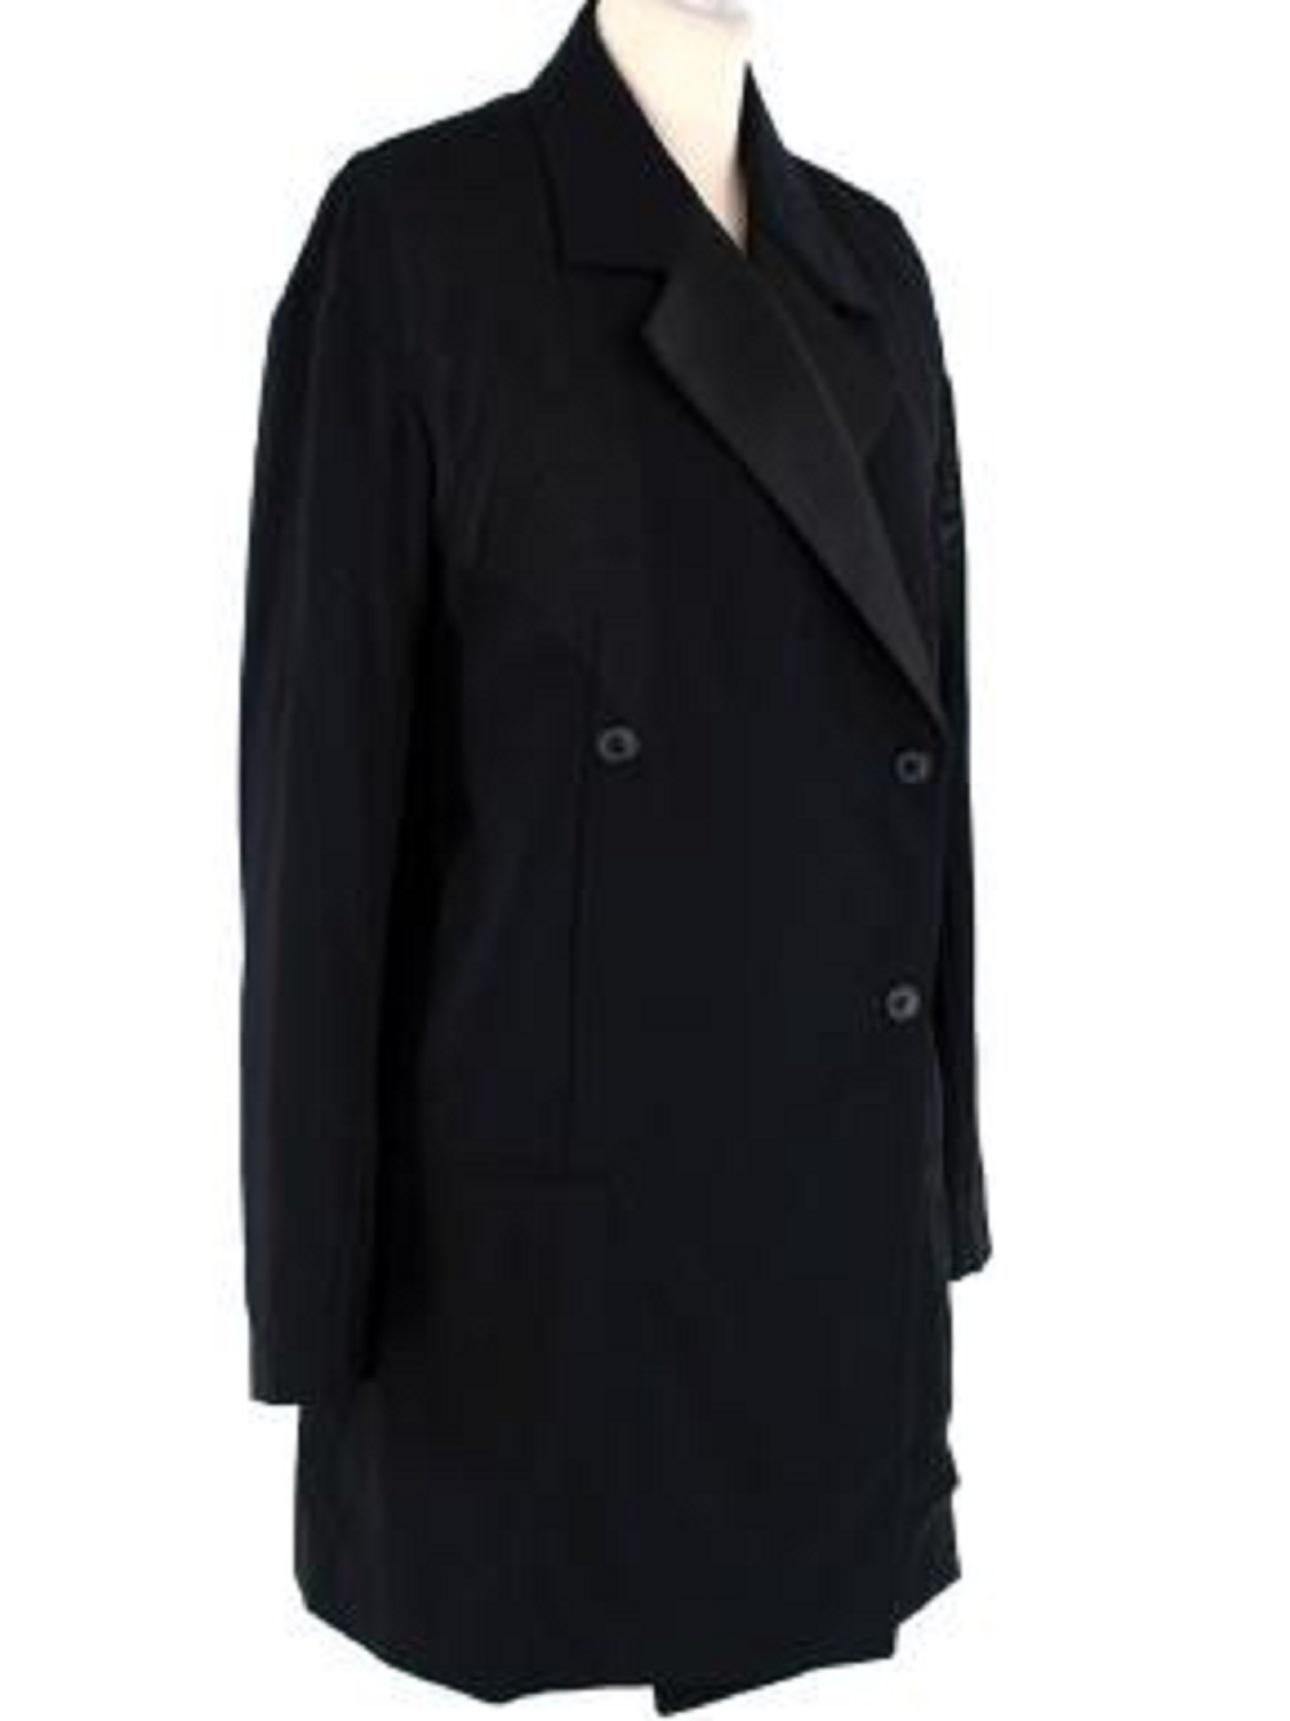 Celine Black Satin Double-Breasted Coat

-Double-breasted 
-Two faux pockets at the waist 
-Fully lined 
-Silk lapels 
-Satin lined 
-Vent at the back 

Material: 

76% Polyester 
24% Soie 

Made in Portugal 

9.5/10 excellent conditions, please